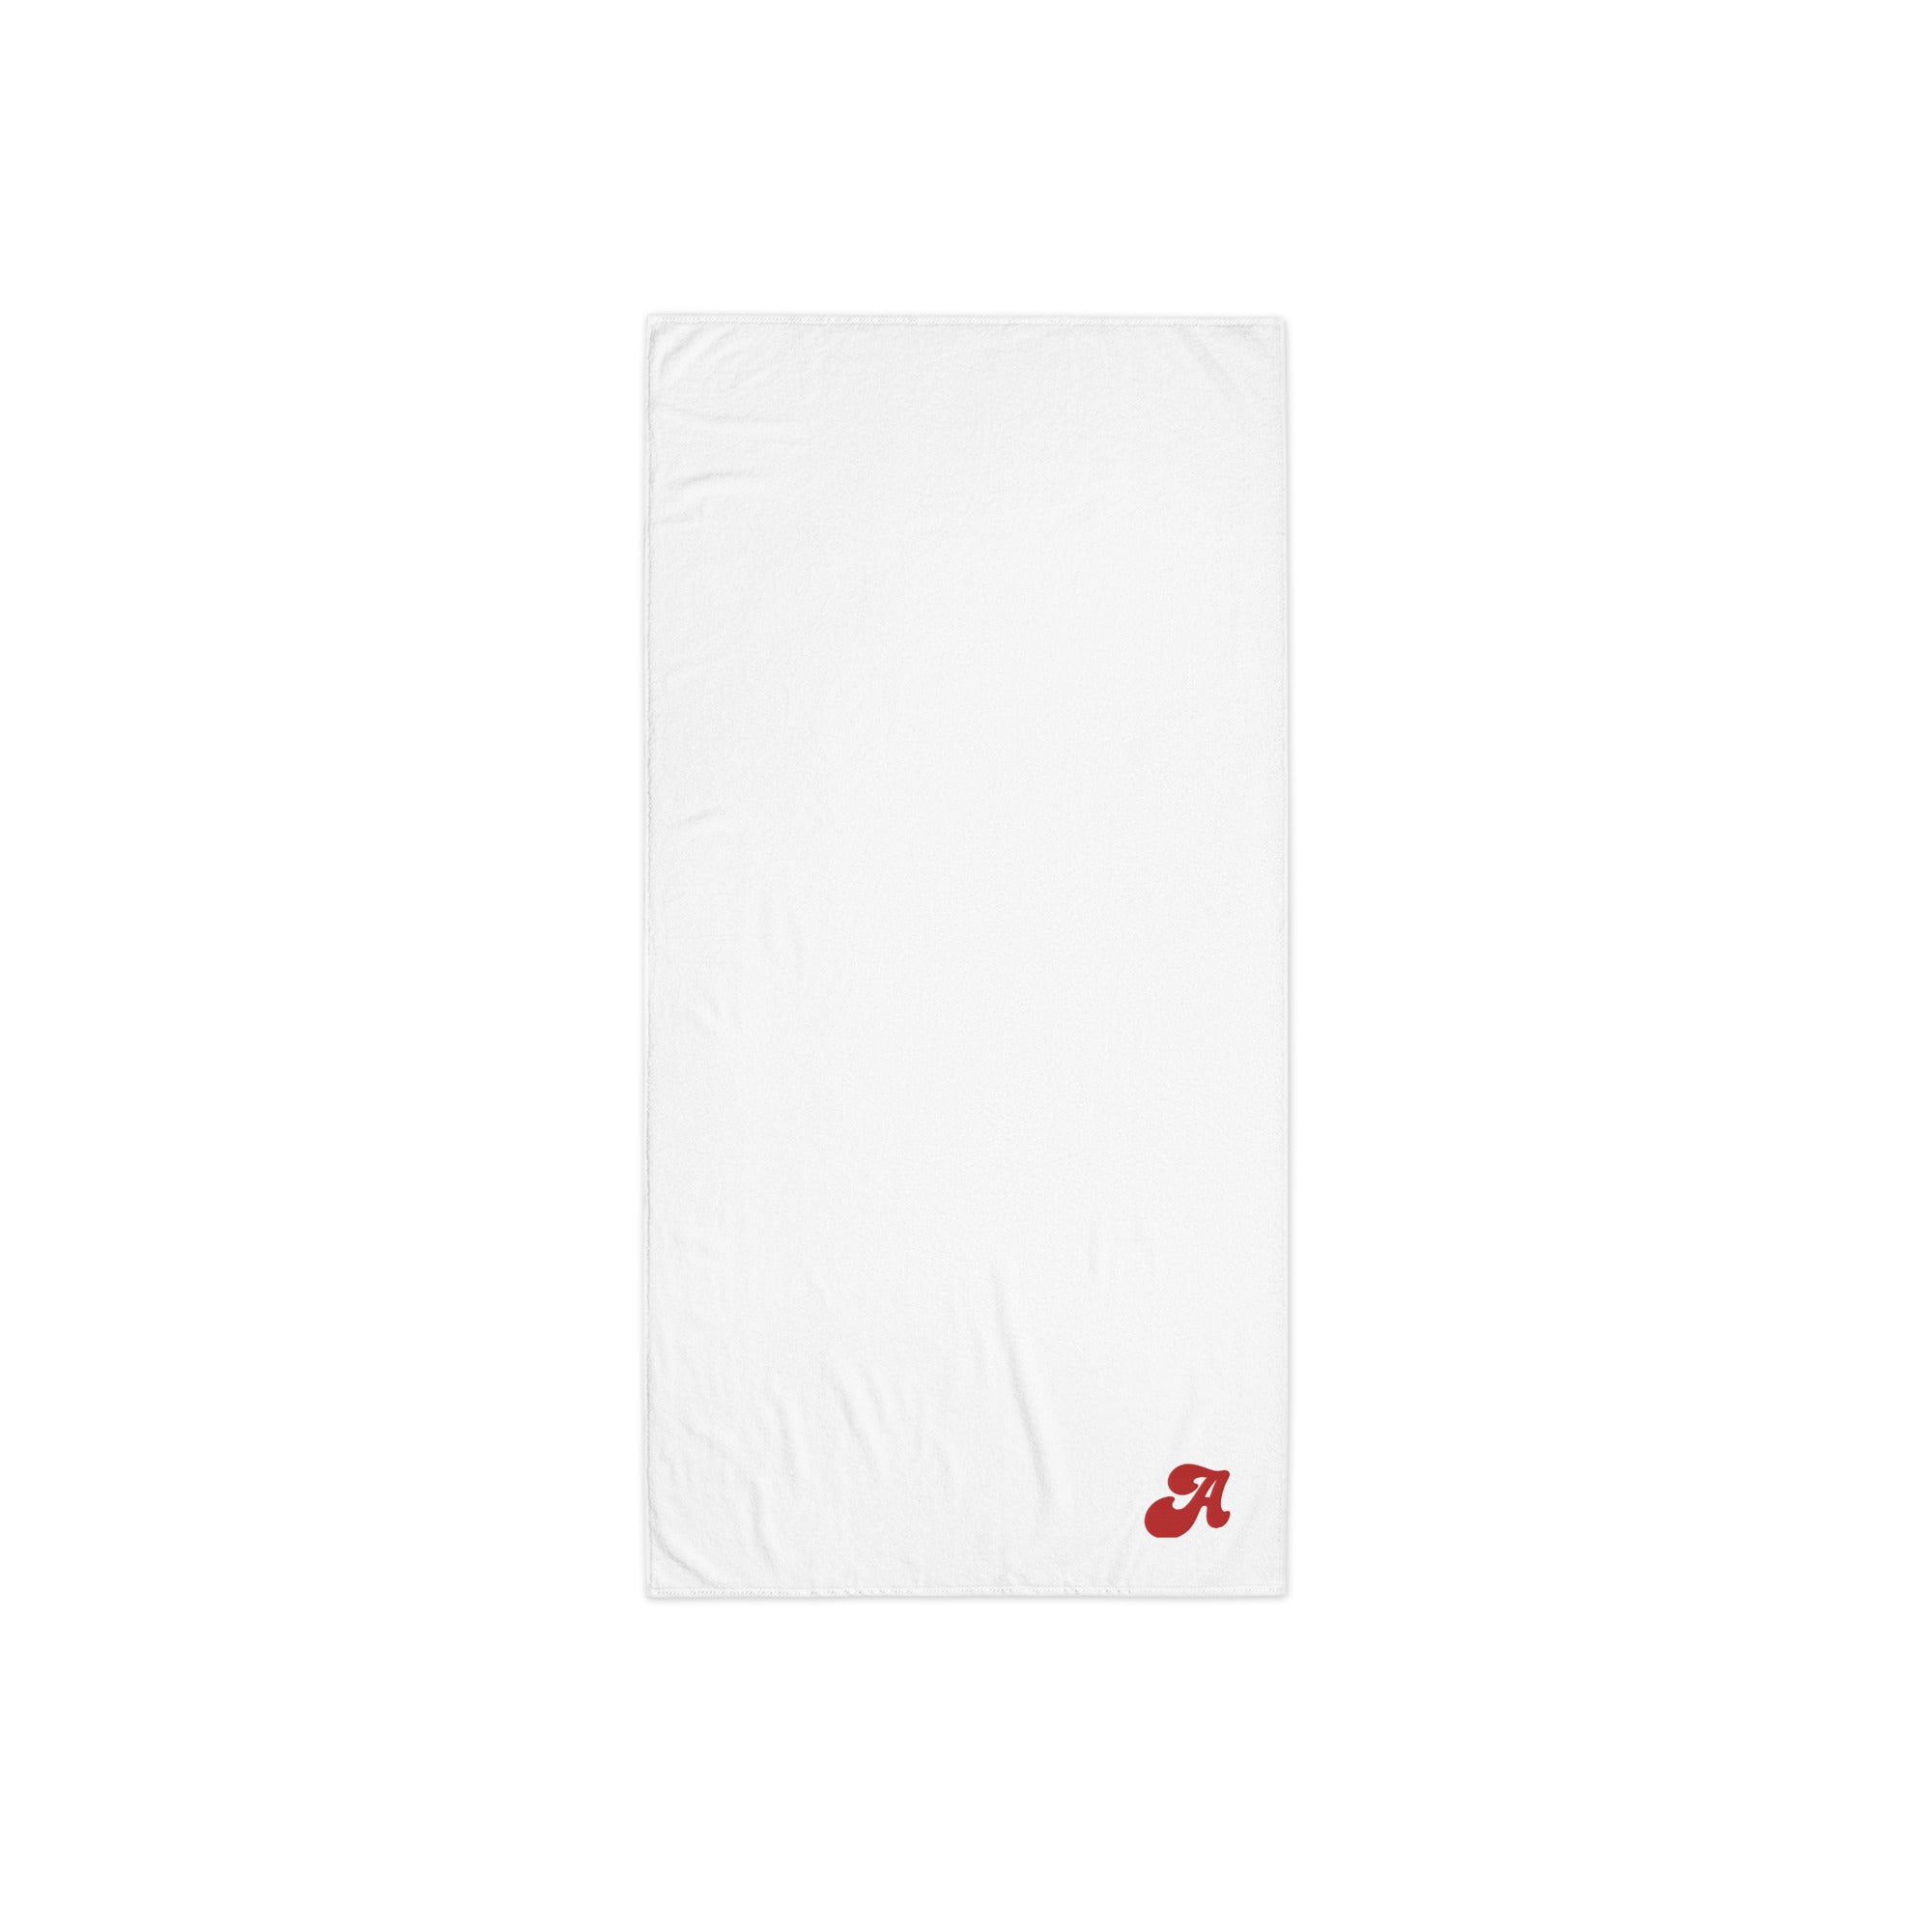 Bath Room Turkish cotton towel, Back to School, Embroidered Initial